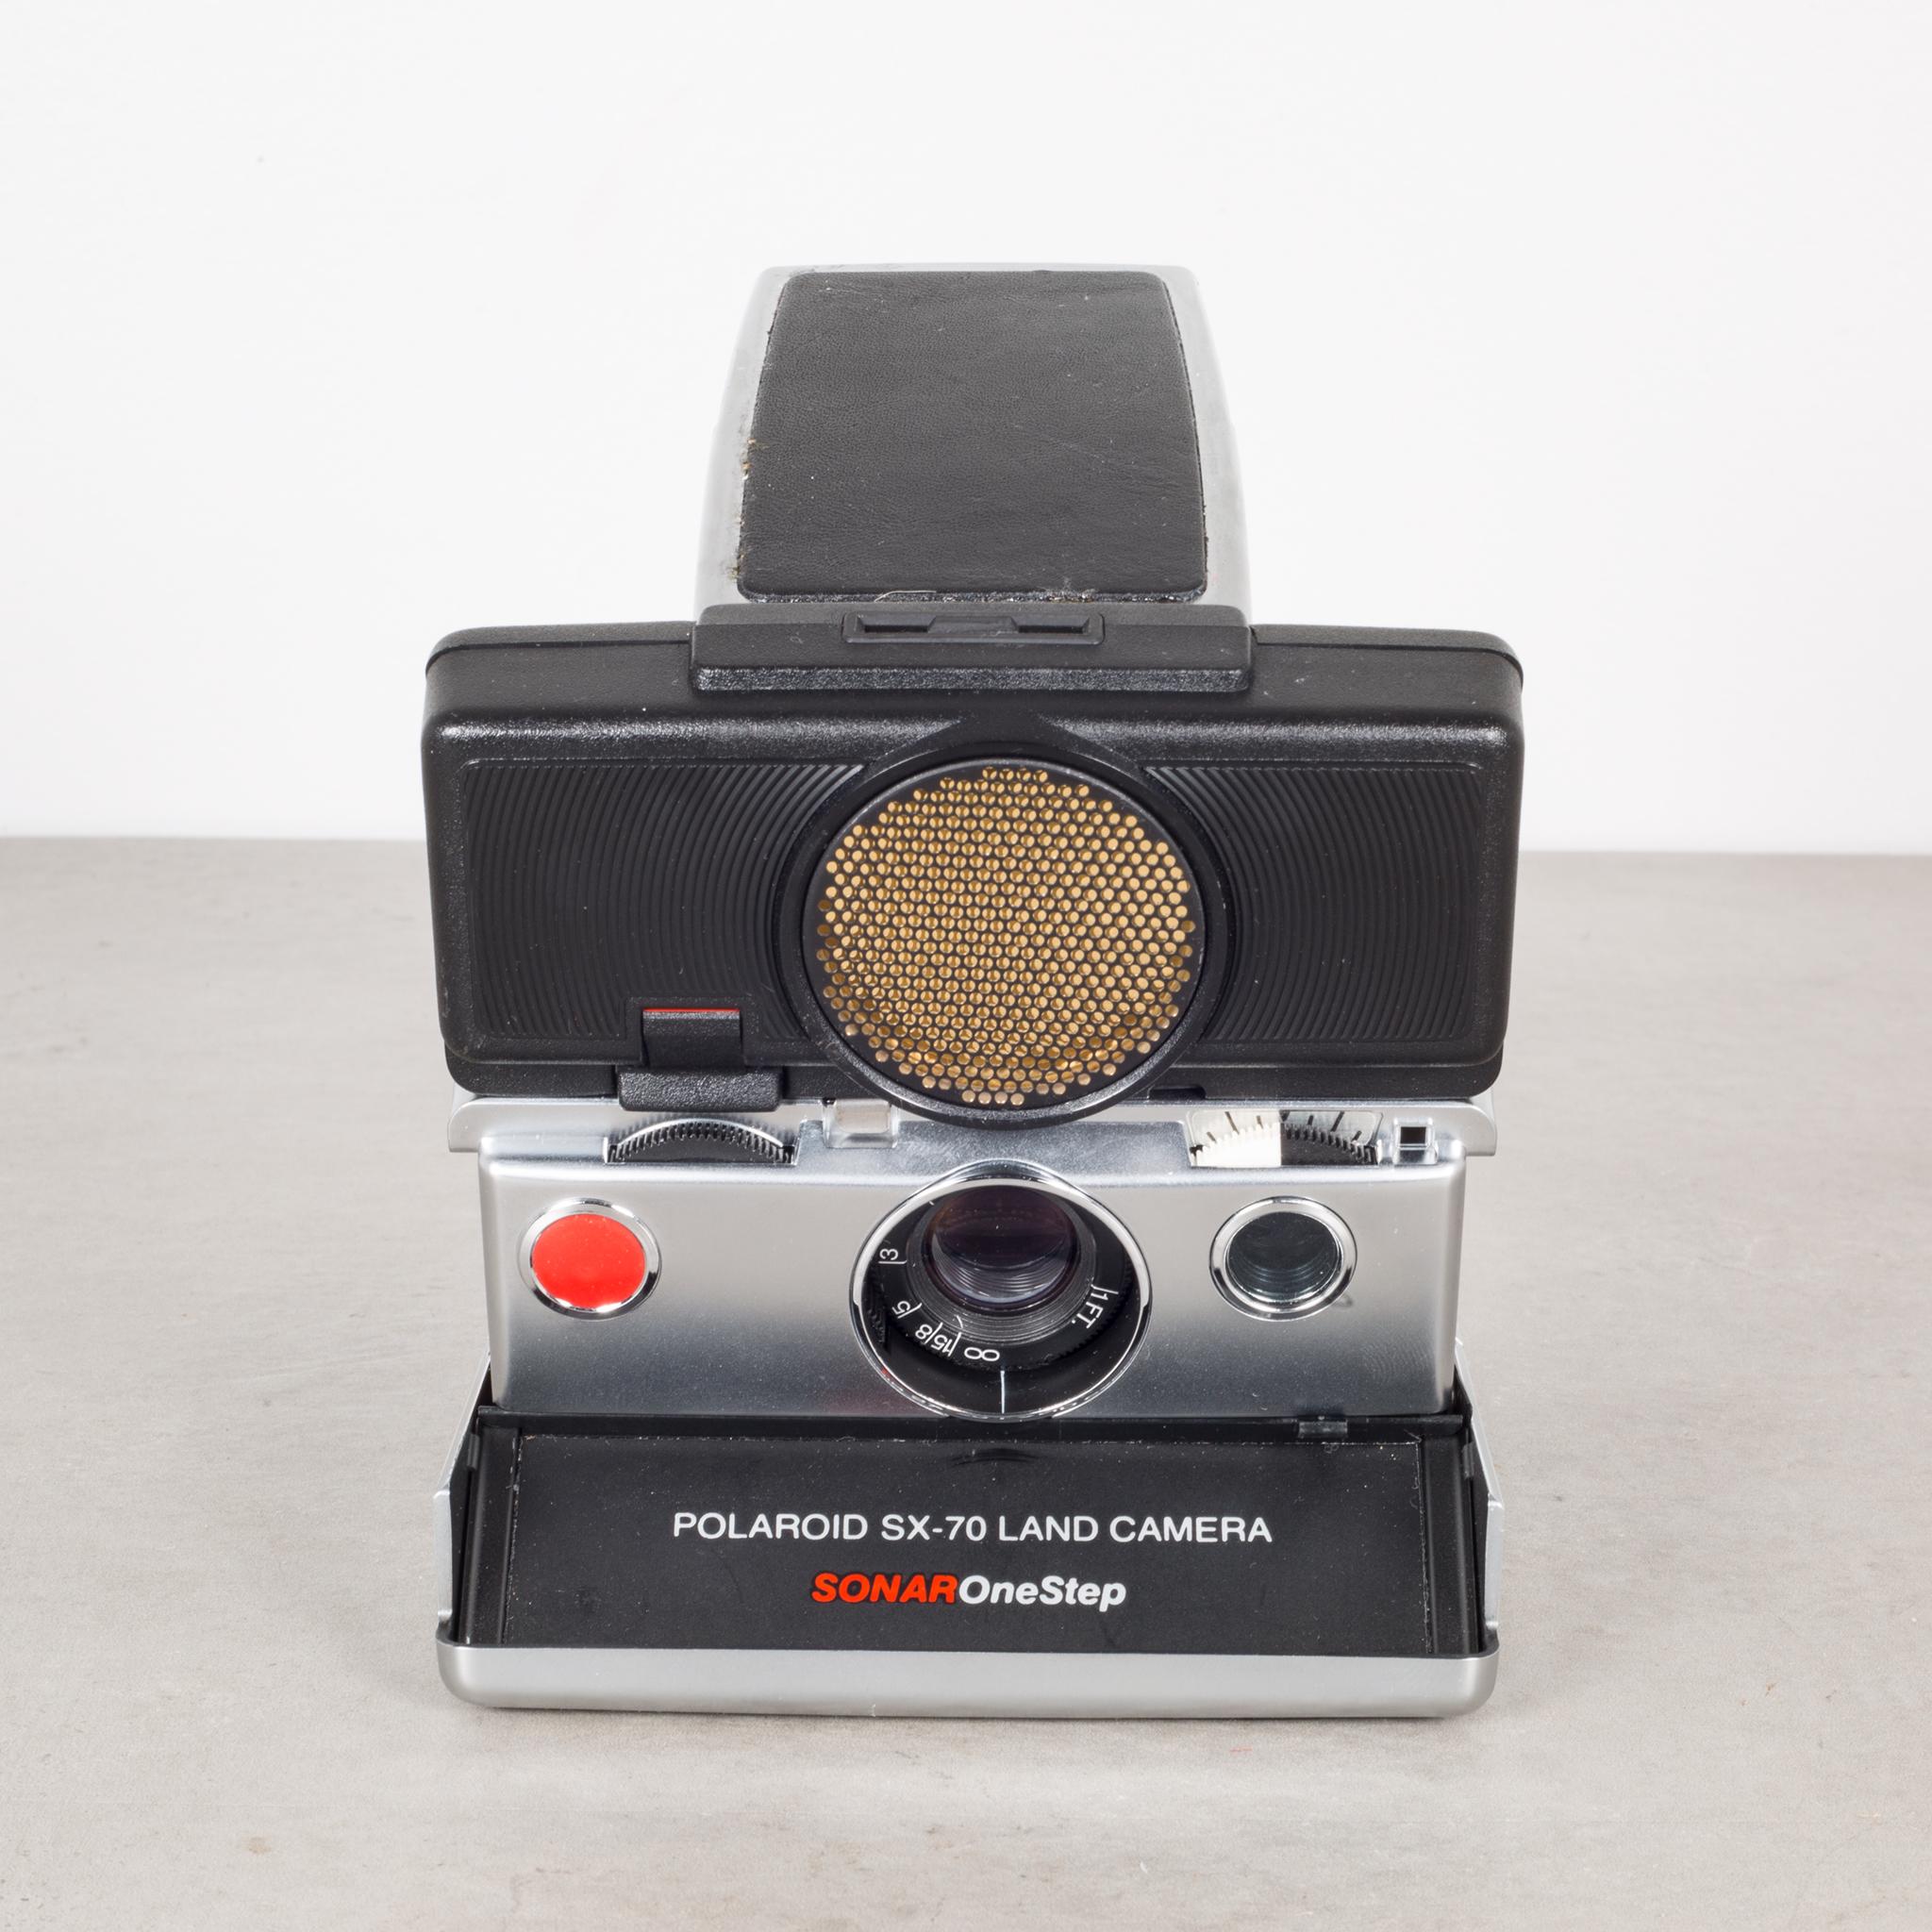 About

This is an original Polaroid Land Camera 